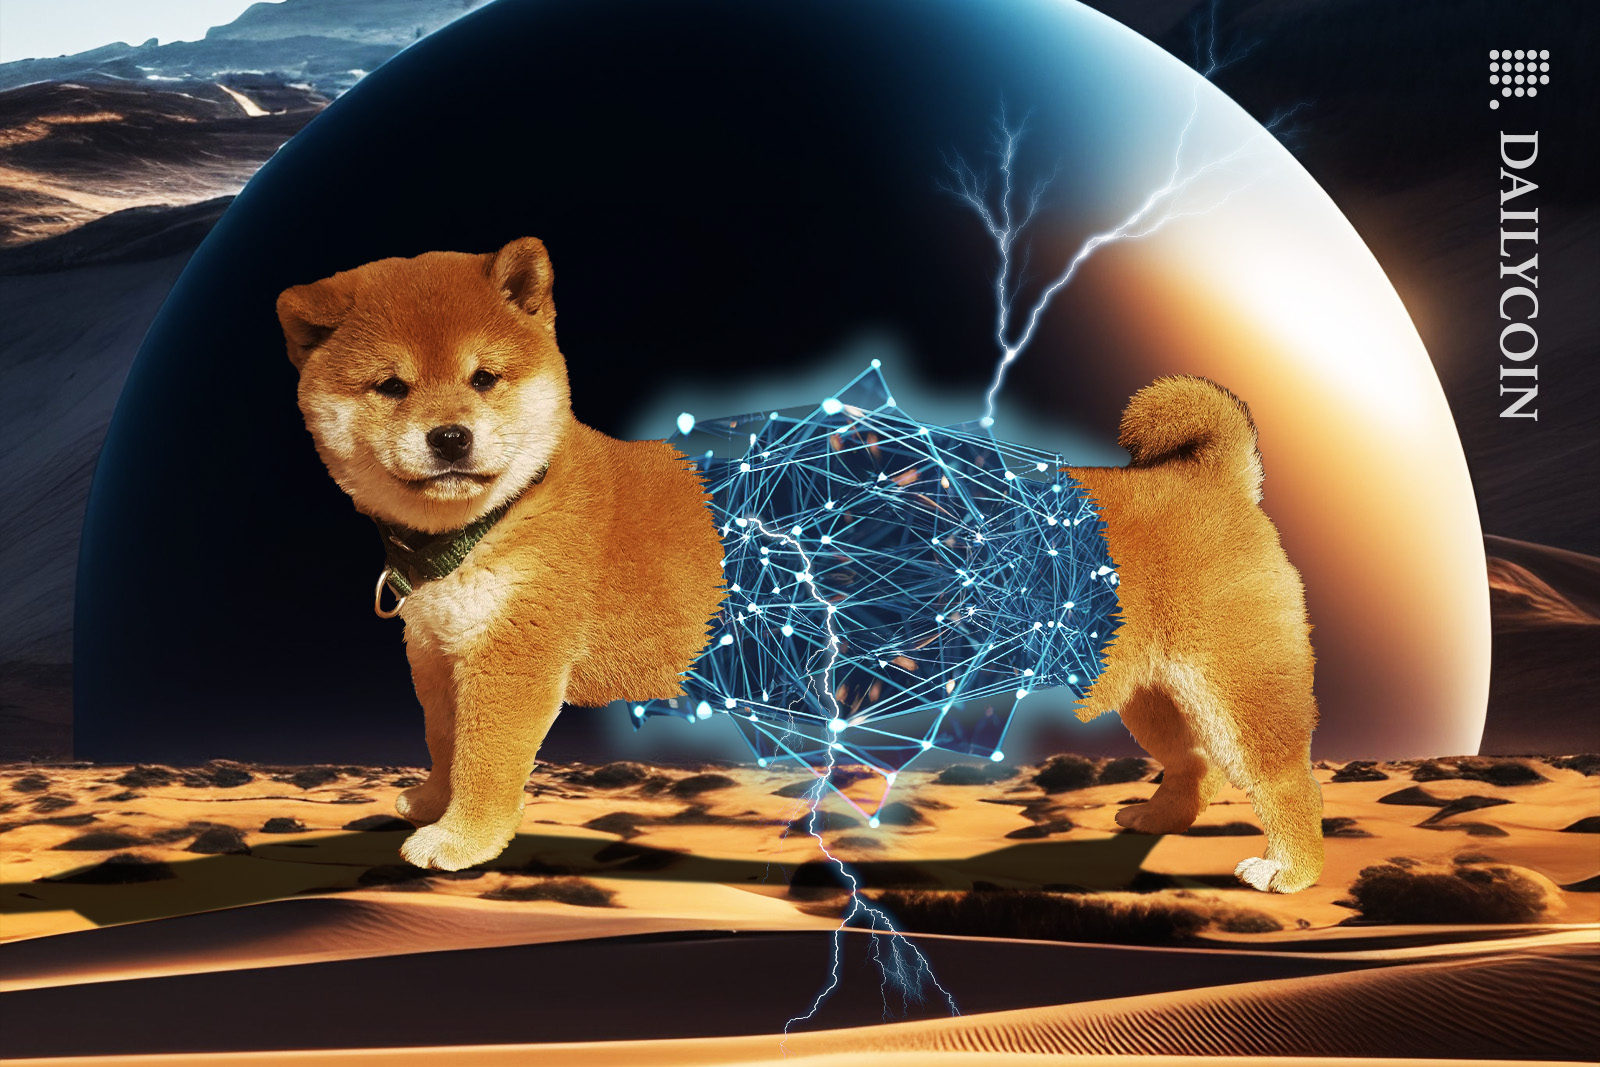 Shiba Inu puppy split in the middle, its body elongated by blockchain, standing in a desert infont of an unidentified sphere.